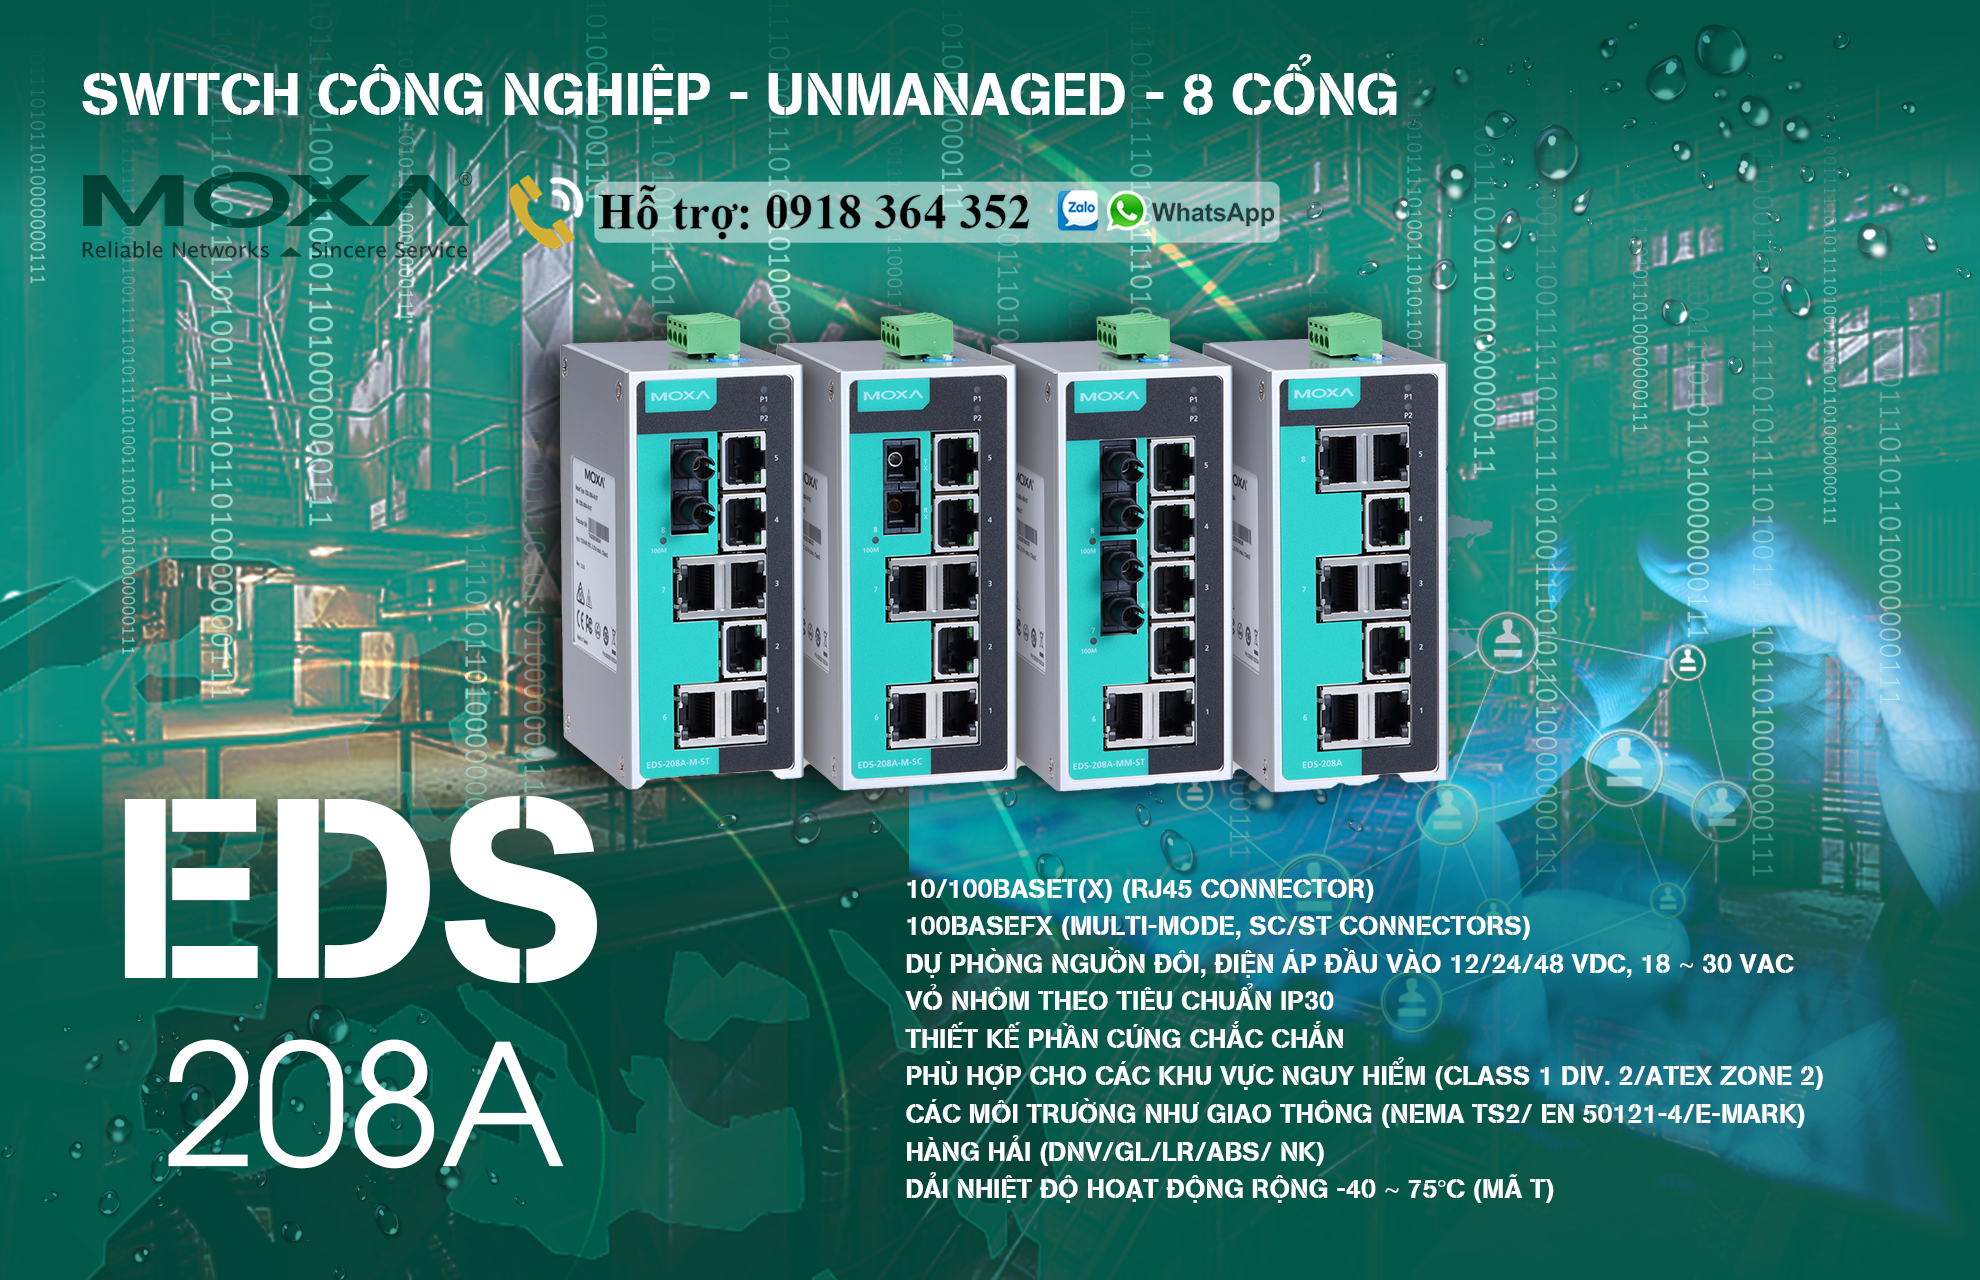 eds-208a-s-sc-t-switch-cong-nghiep-8-cong-toc-do-10-100m-dai-ly-switch-mang-cong-nghiep-moxa-viet-nam.png